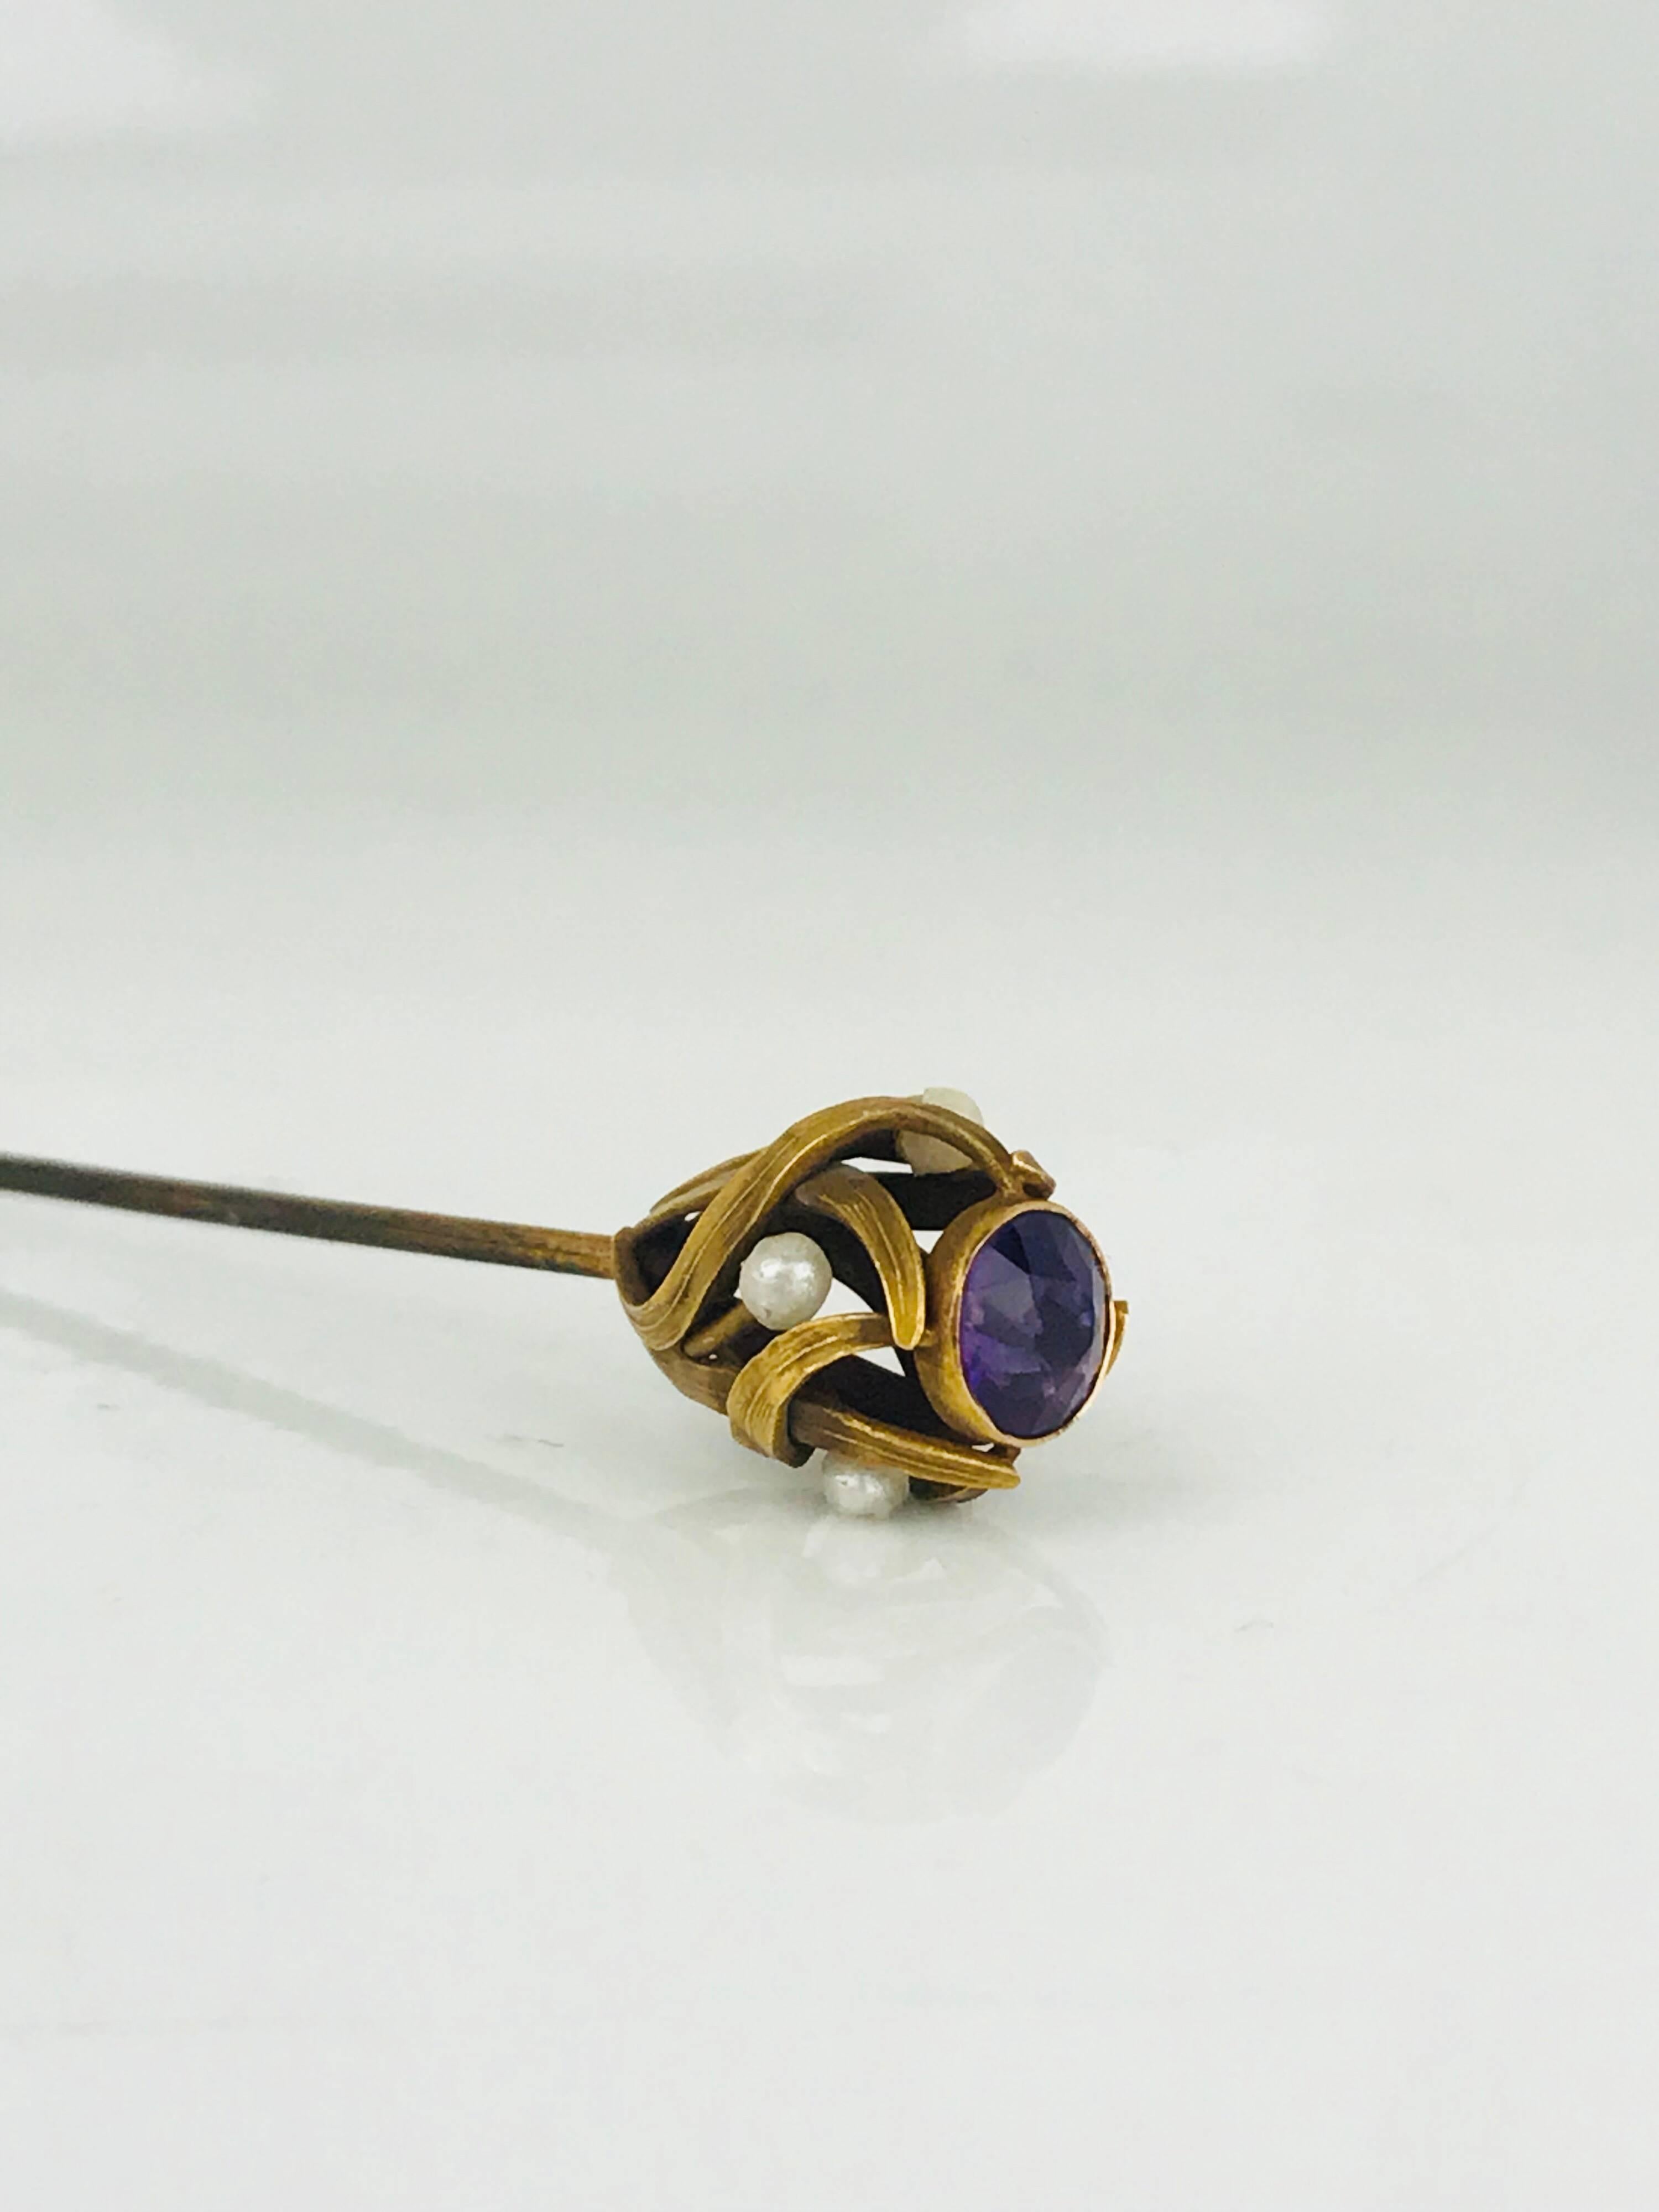 Victorian, 14 Karat, Old Mine-Cut Amethyst and Seed Pearl Hat Pin, circa 1840 For Sale 1